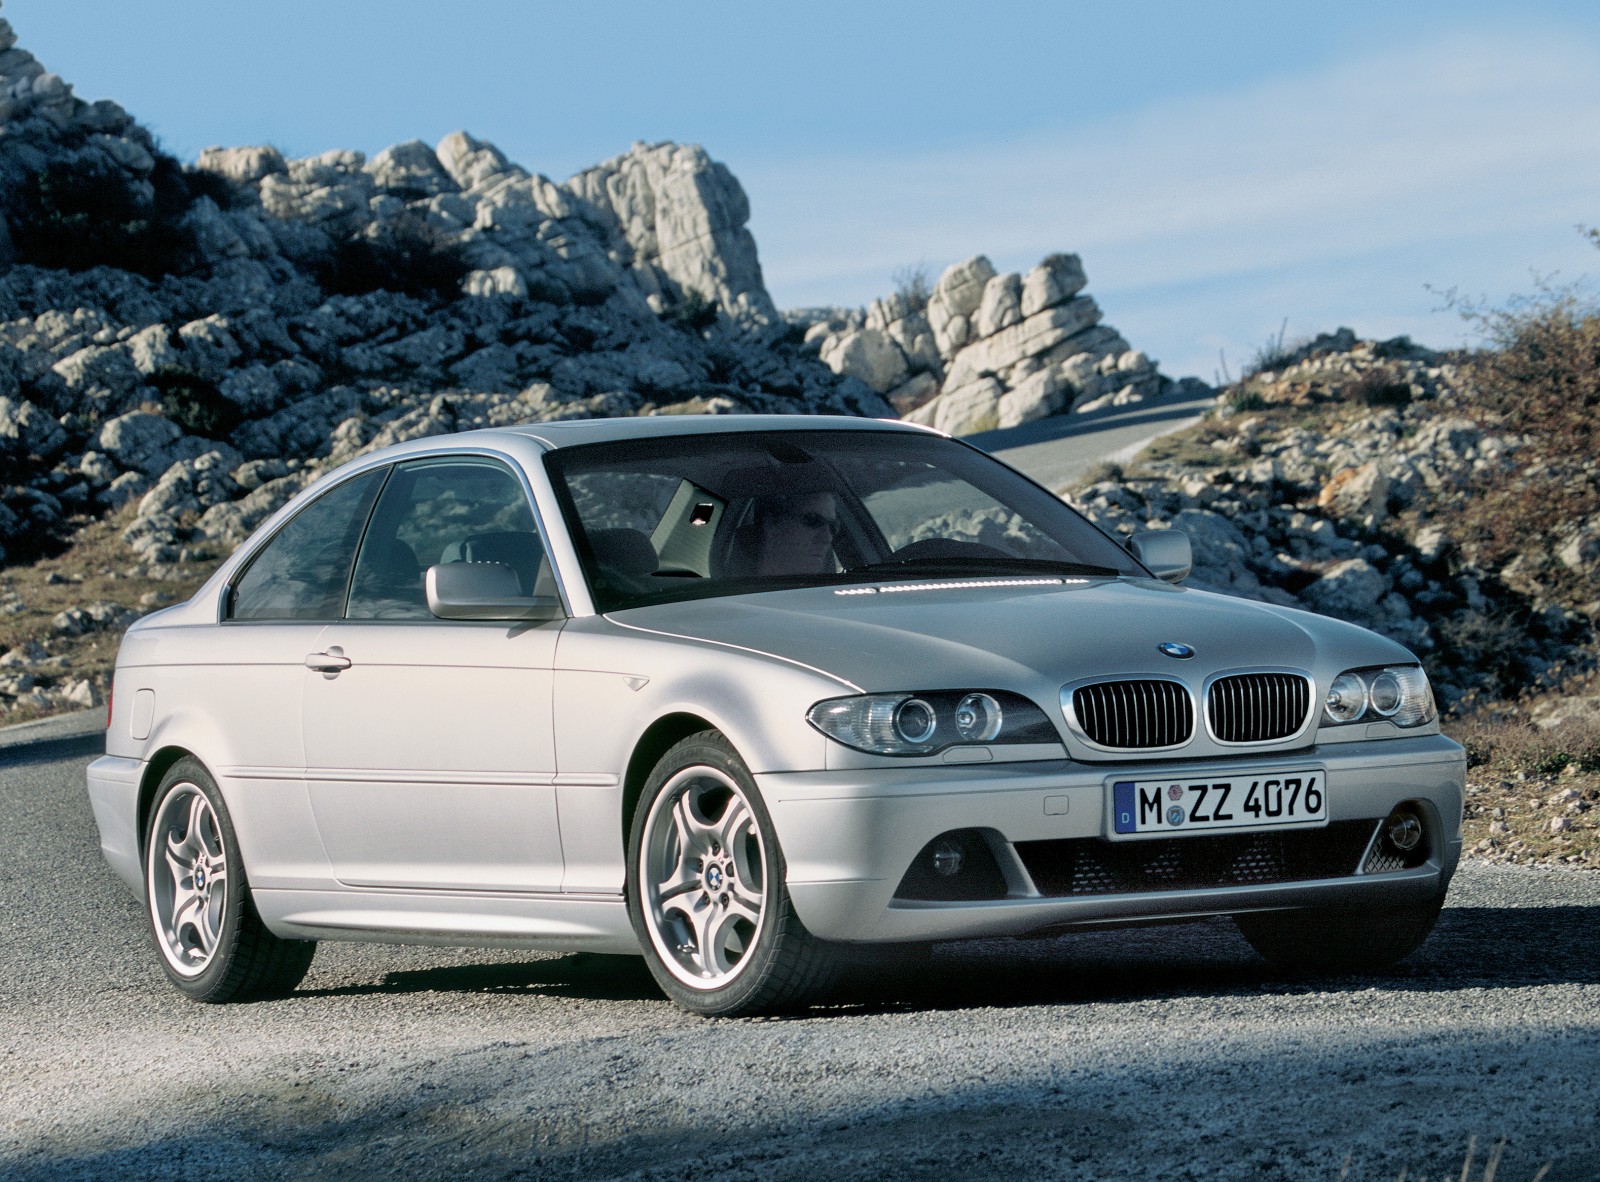 2004 BMW 325i Coupe Shown - see full photo gallery.